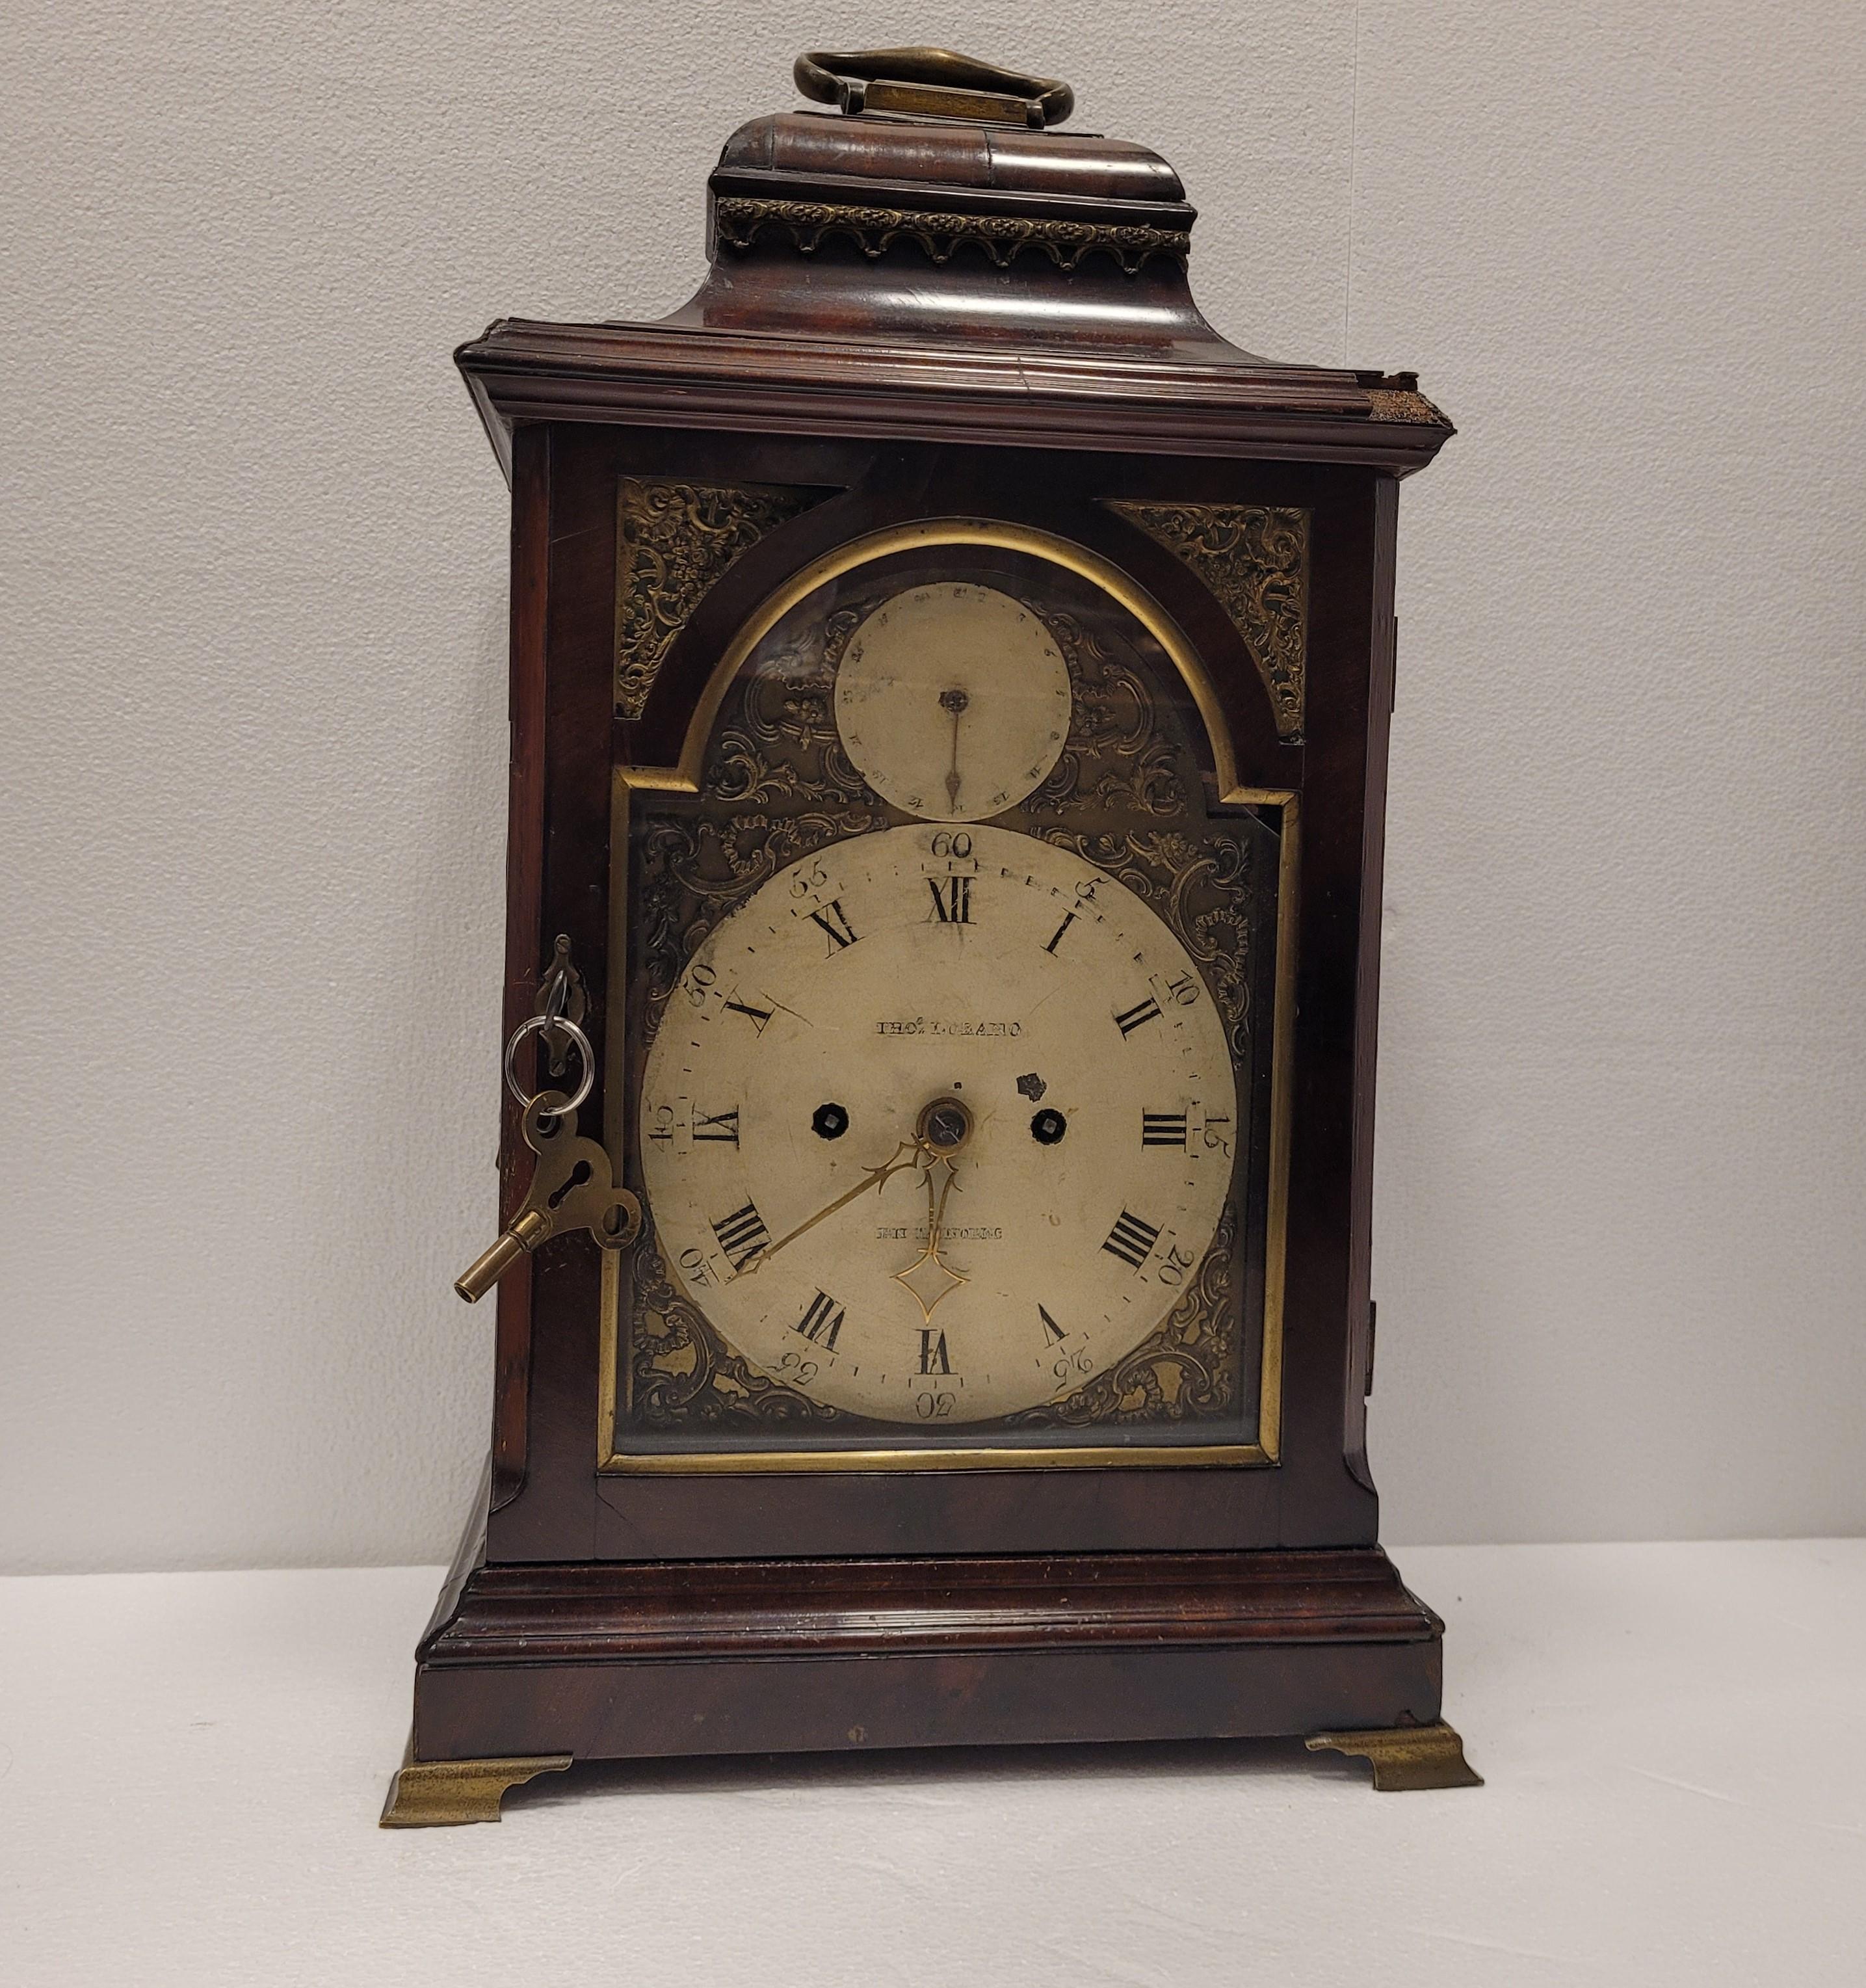 18h century Georgian English bracket clock.

A fine quality  mahogany and ormolu-mounted Georgian III English Bracket.
Exquisite bracket clock made by the watchmaker Thomas Lozano, signed in London, in 18th century England. This table clock has a